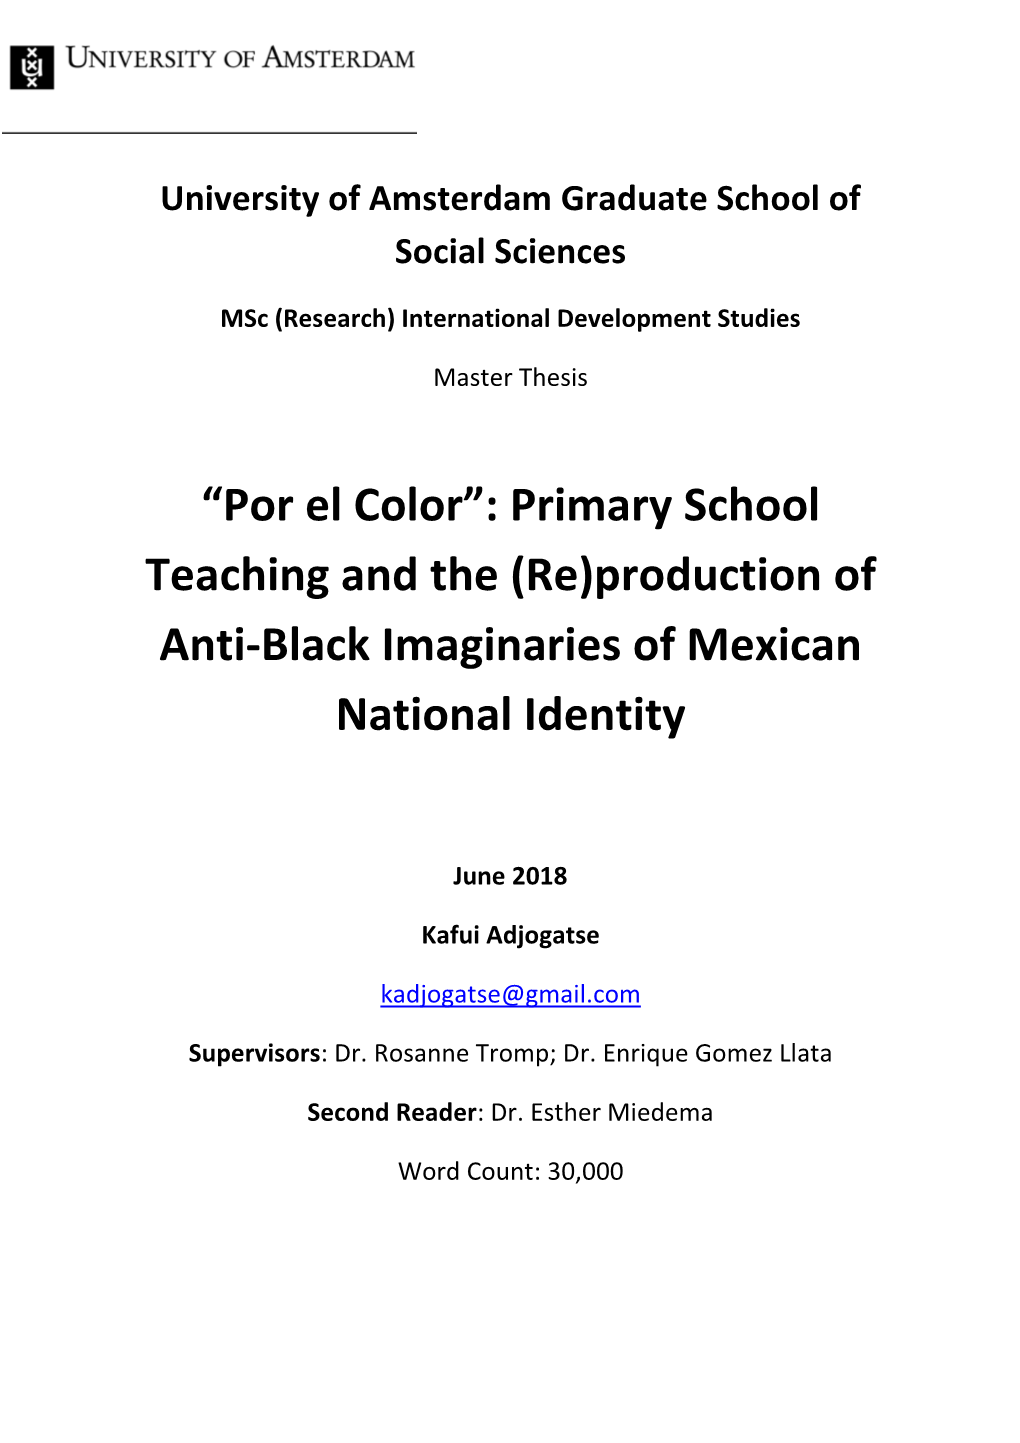 “Por El Color”: Primary School Teaching and the (Re)Production of Anti-Black Imaginaries of Mexican National Identity